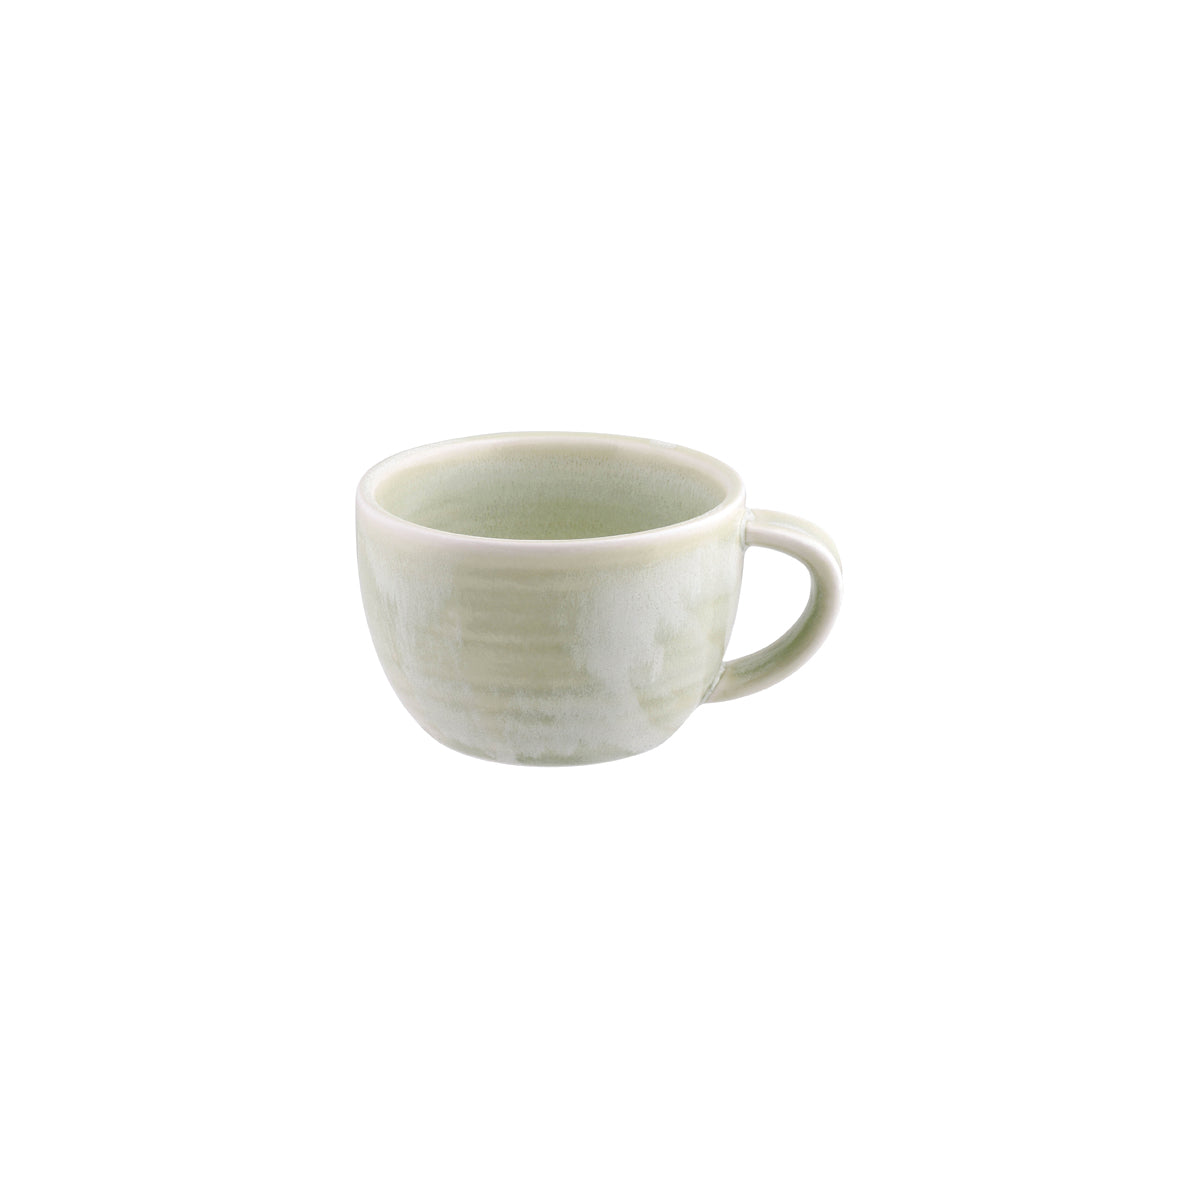 Coffee / Tea Cup - 280ml, Lush from Moda Porcelain. made out of Porcelain and sold in boxes of 6. Hospitality quality at wholesale price with The Flying Fork! 